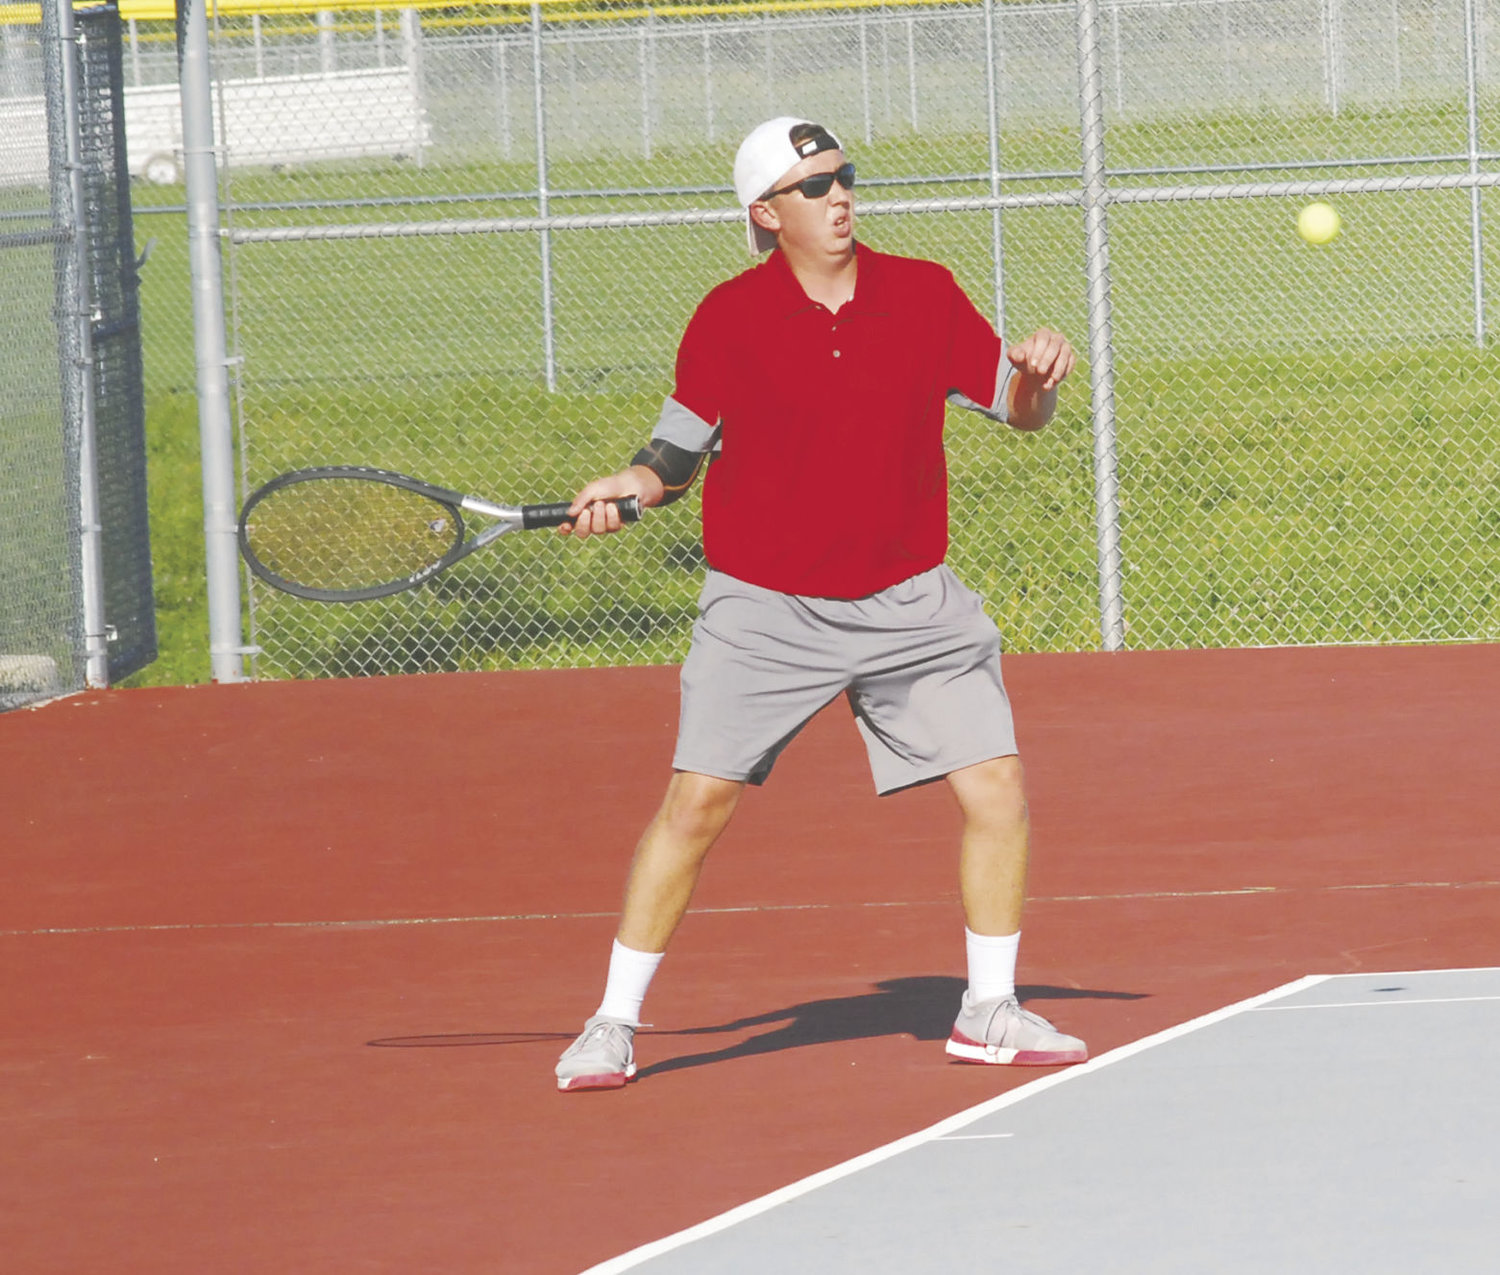 Southmont's Trevor McKinney defeated Fountain Central's Cody Linville 6-4, 3-6, 6-2 to seal a 3-2 match win for the Mounties.